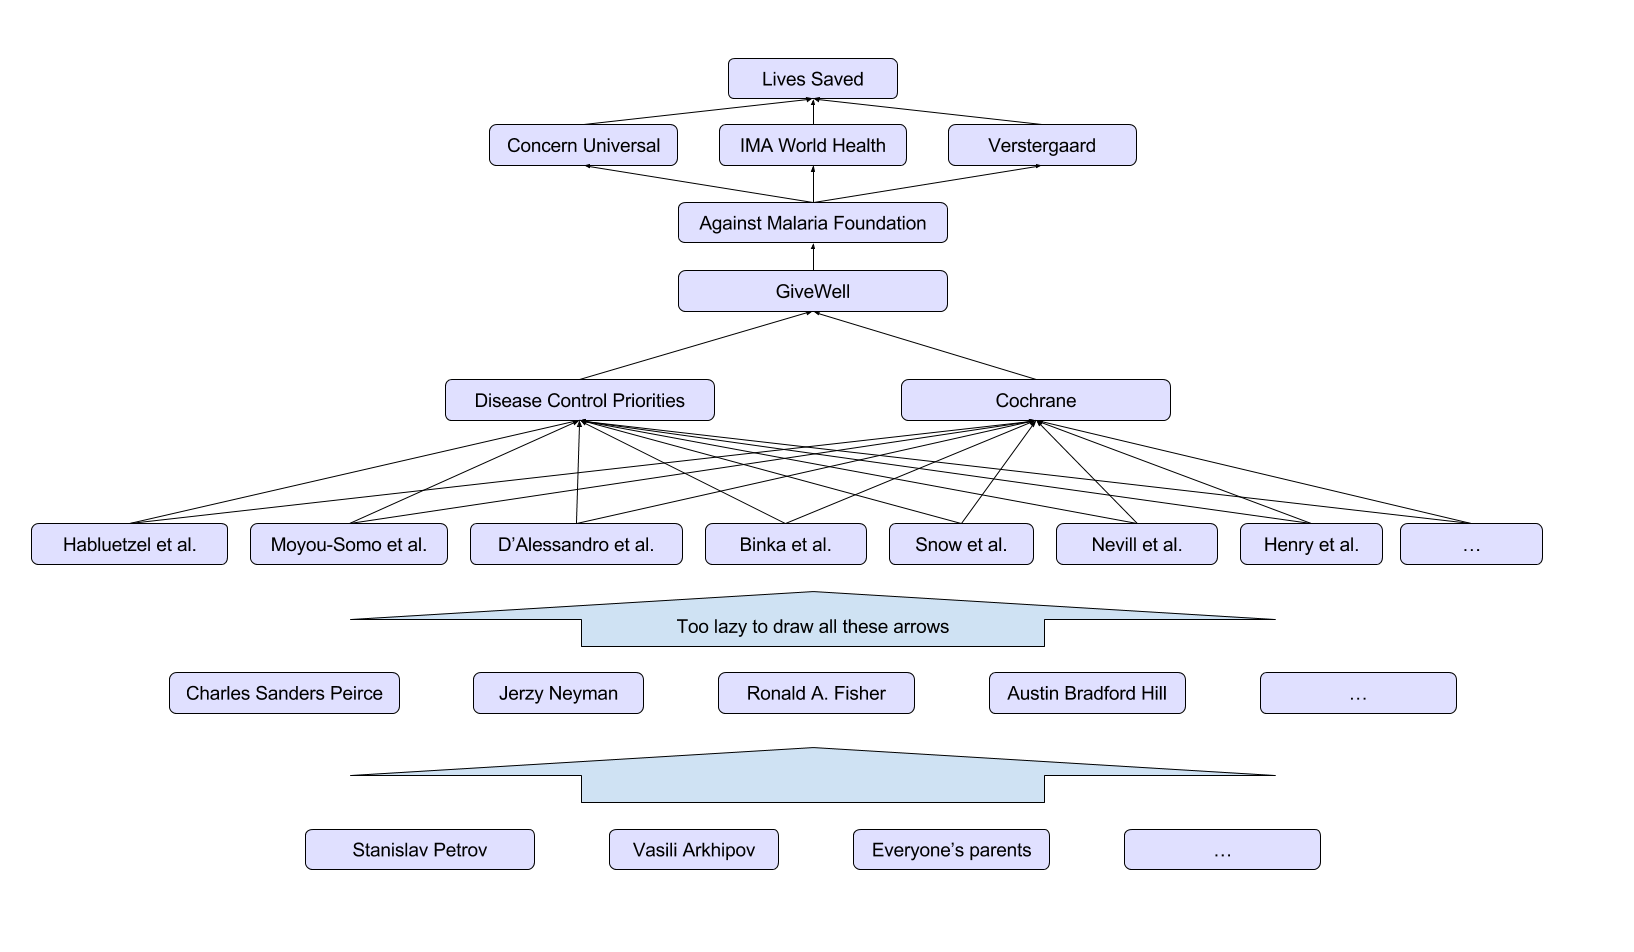 Dependency tree of contributions